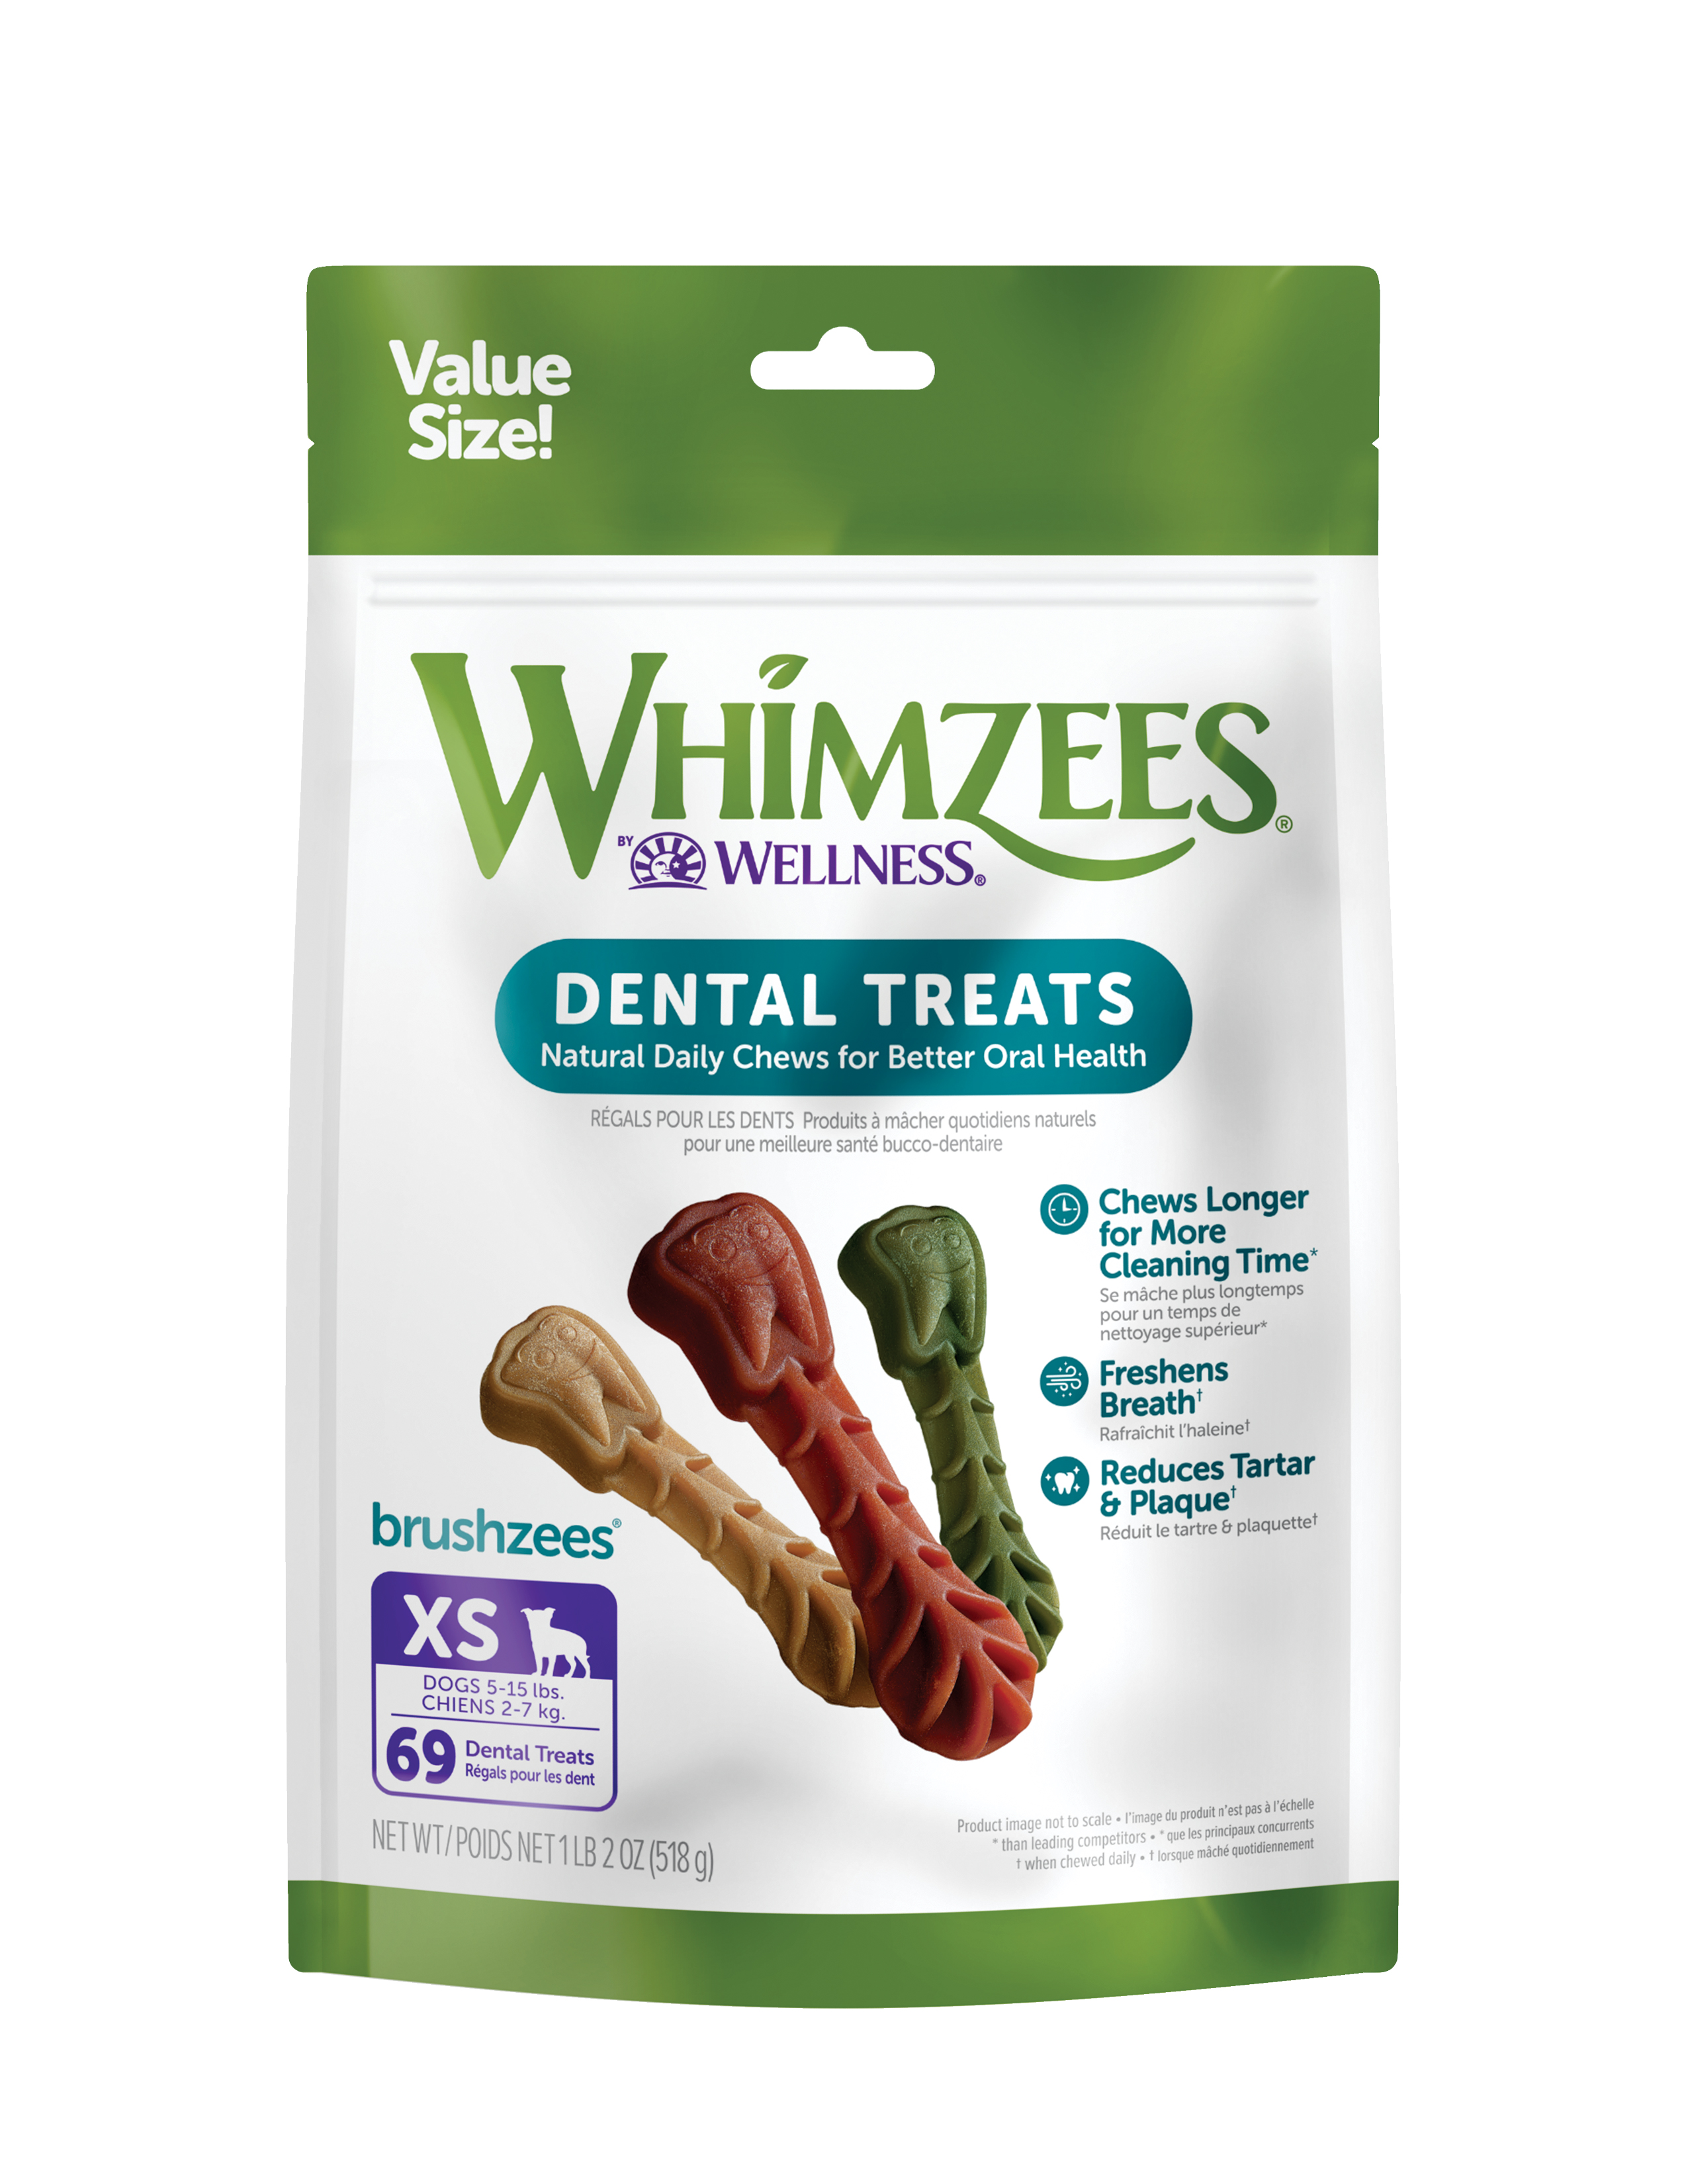 WHIMZEES Value Bags Brushzees